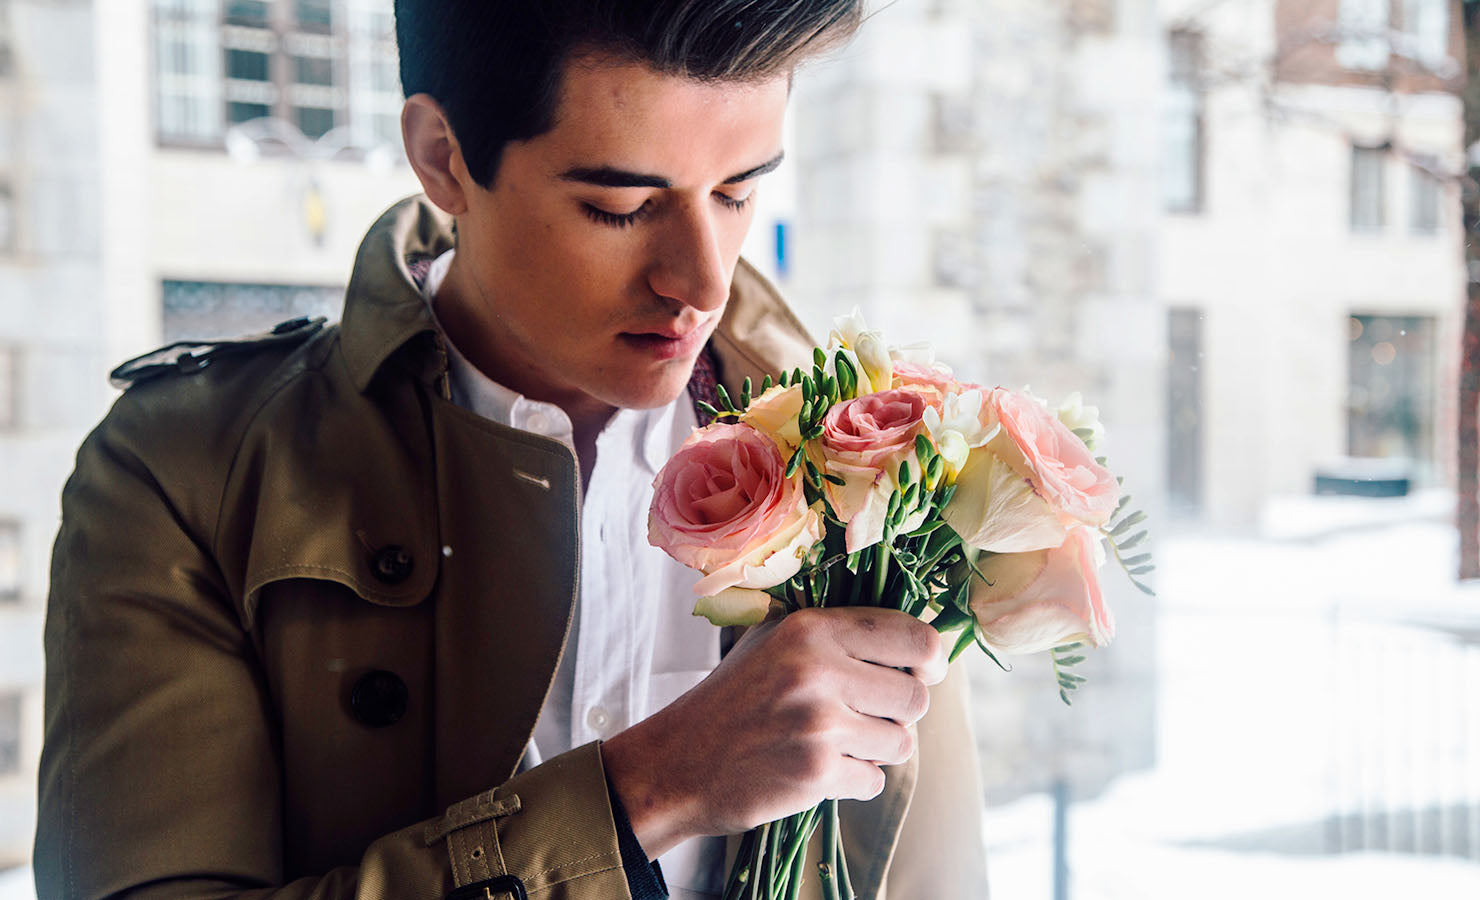 bloomthis-blog-for-him-flowers-gifts-for-every-occasion-01-man-holding-flower-bouquet-